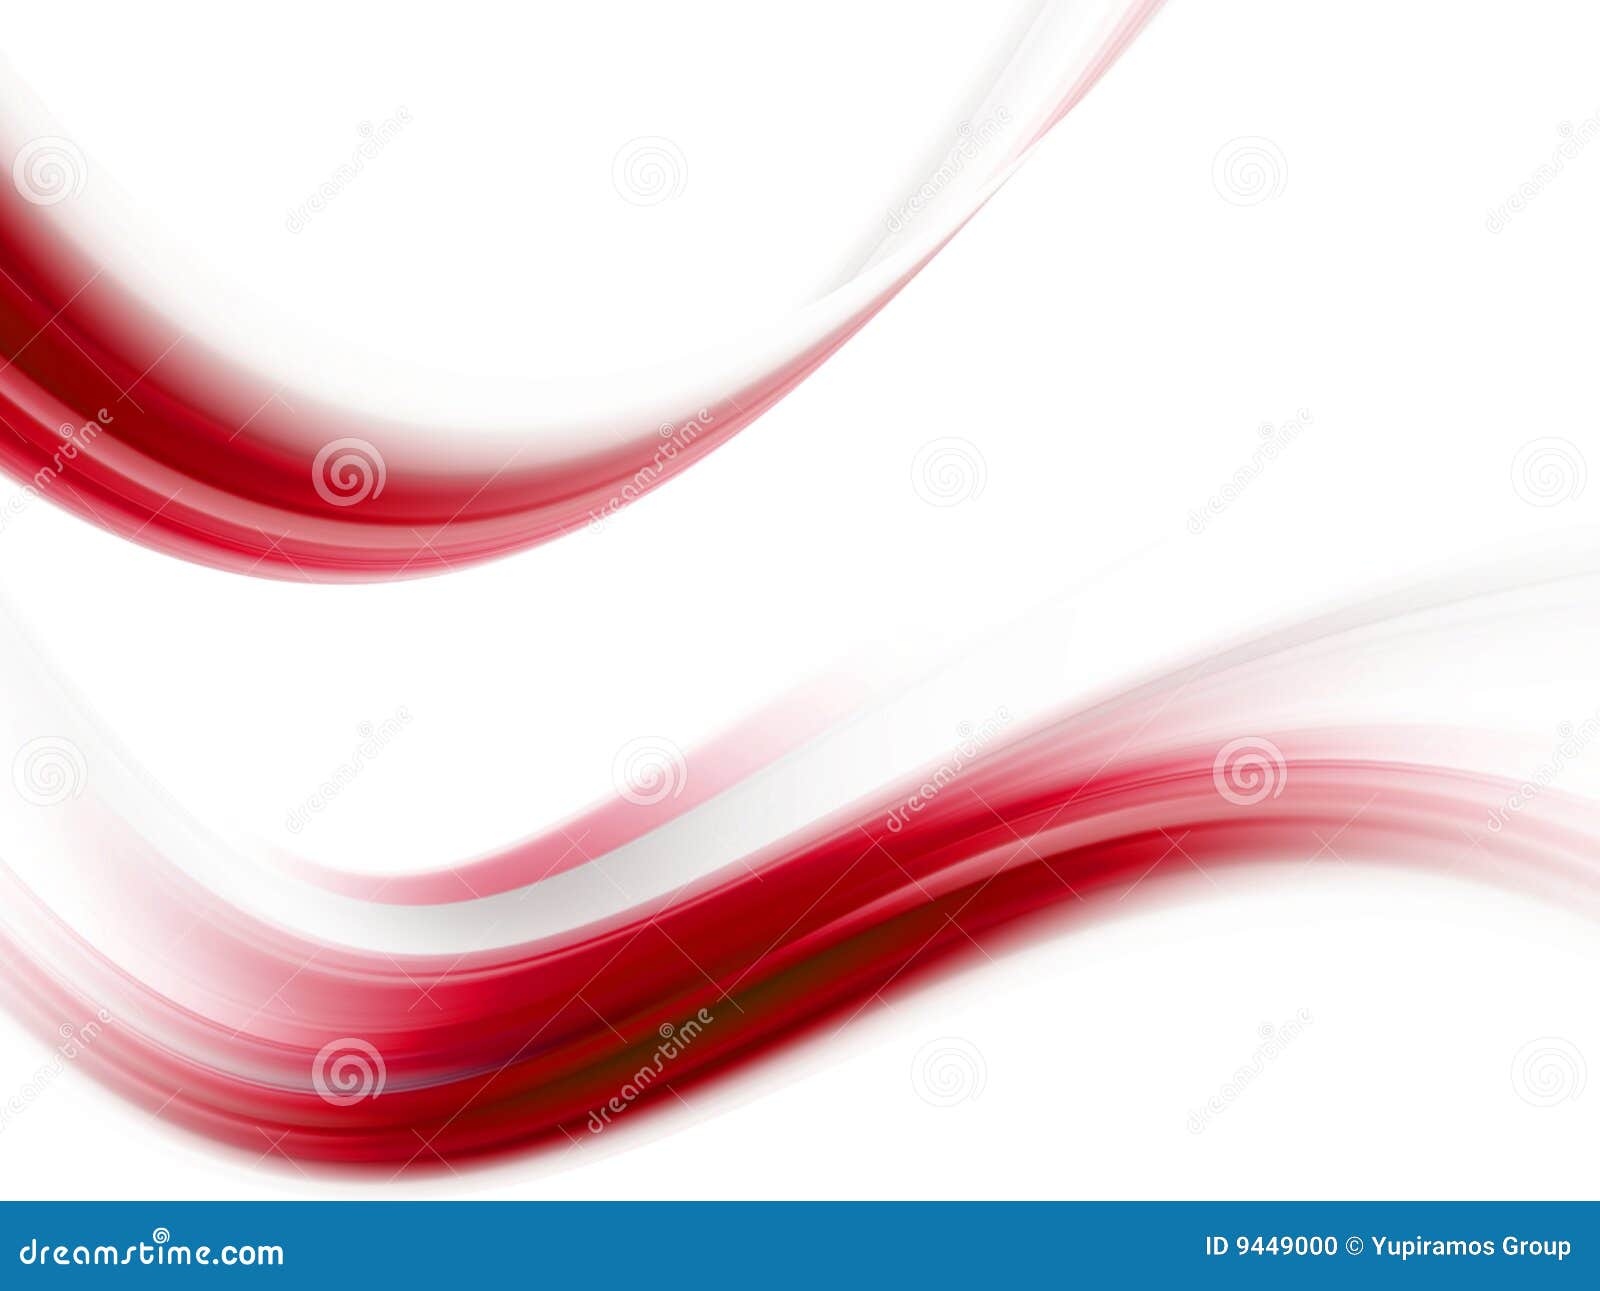 Red Waves Stock Photo - Image: 9449000